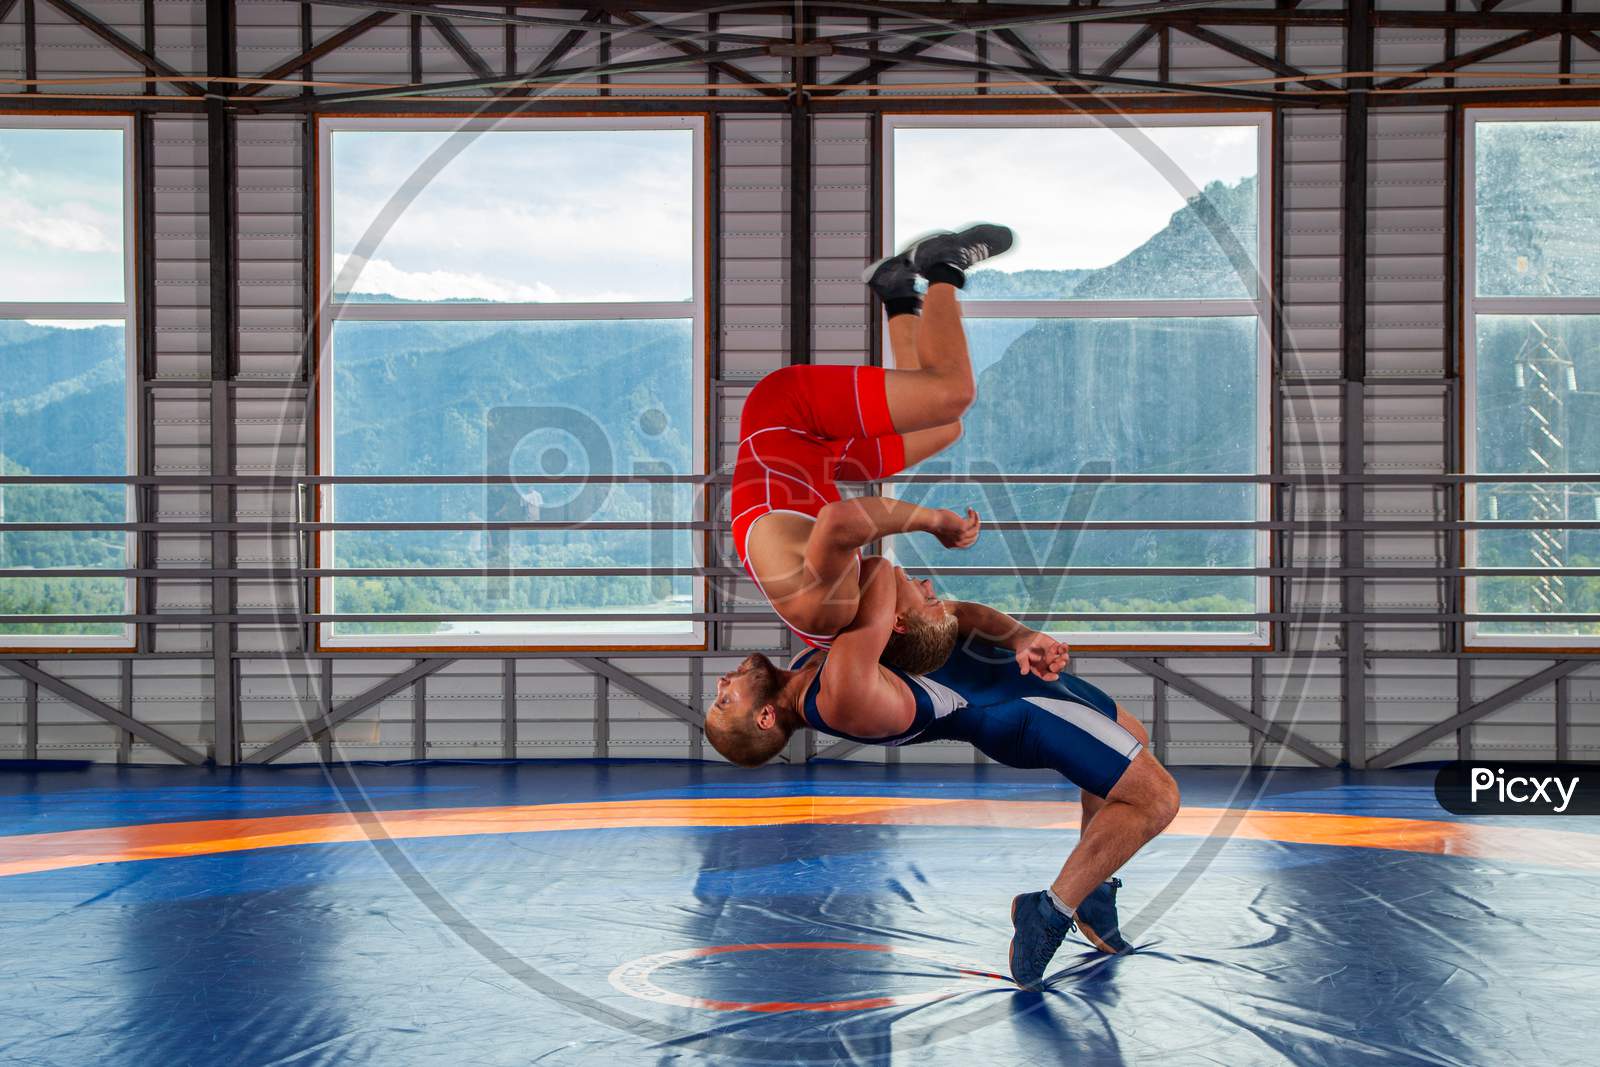 Greco-Roman Wrestling Training, Grappling. Two Greco-Roman  Wrestlers In Red And Blue Uniform Wrestling  On A Wrestling Carpet In The Gym.Training And Practicing Sports Throws